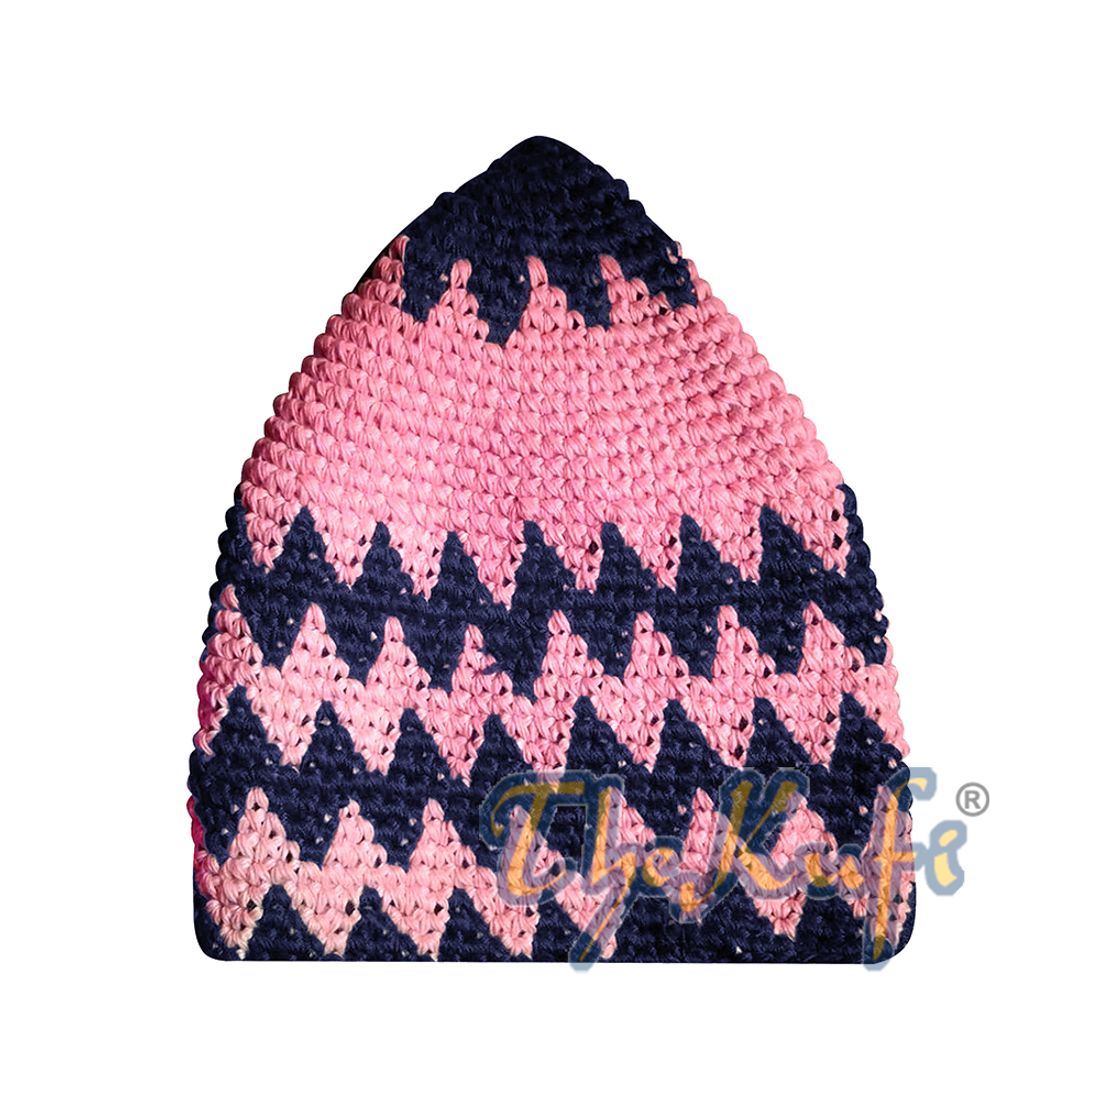 Hand-crocheted Cotton Dark Blue Pale Pink Zigzag Design Comfortable Head Cover